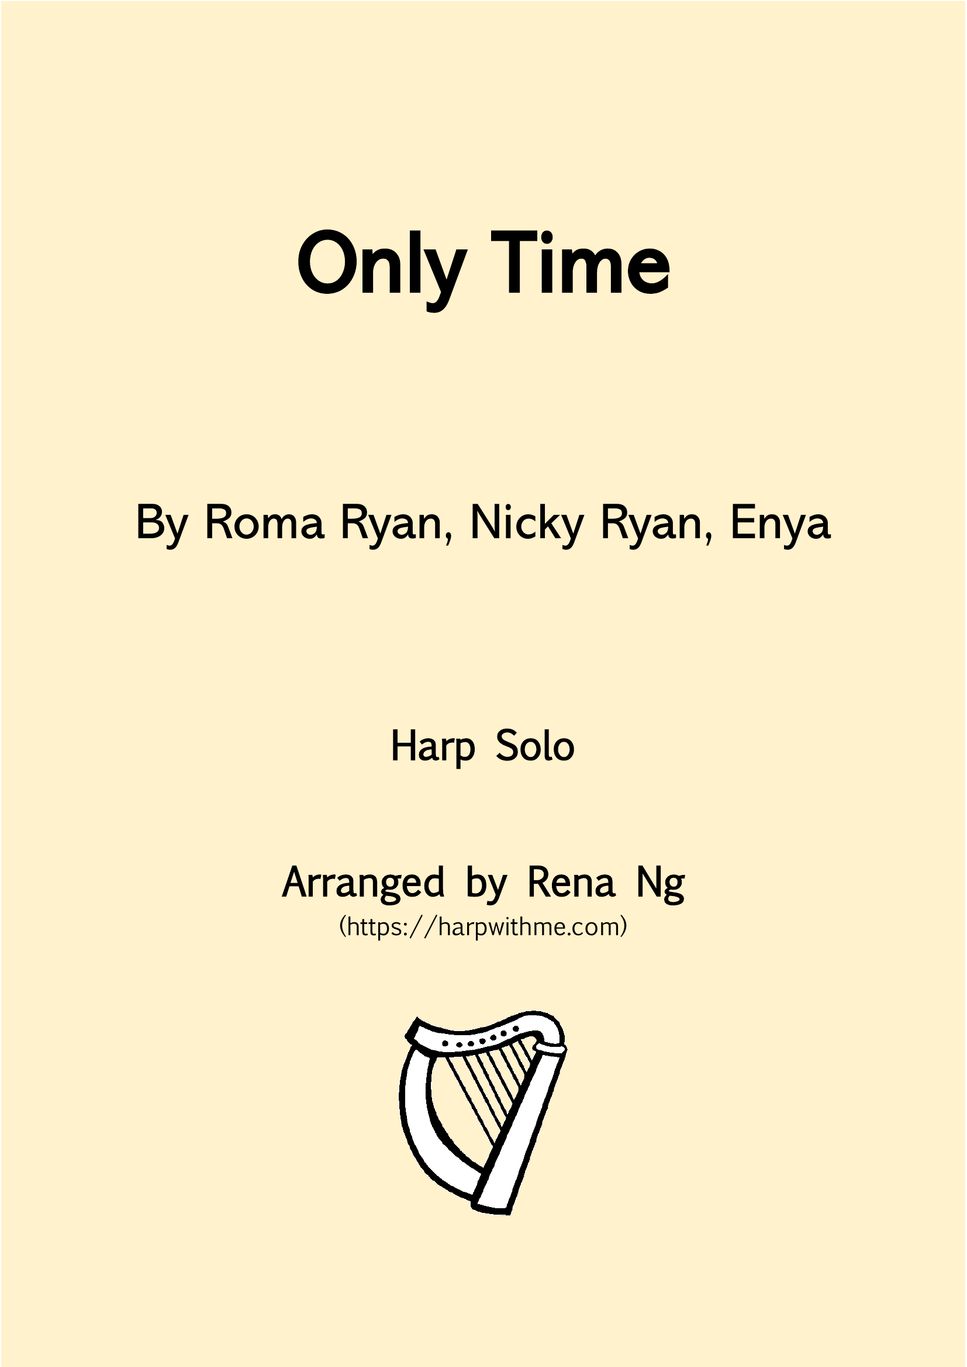 Enya - Only Time (Harp Solo) - Intermediate by Harp With Me